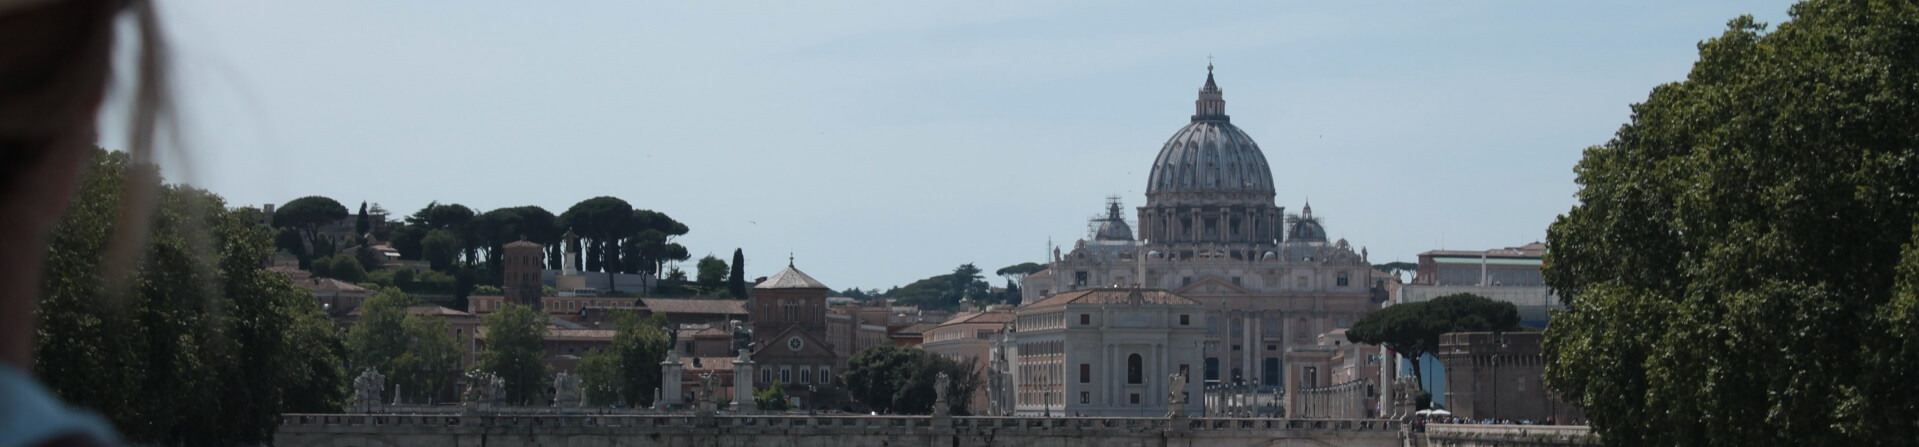 What is St. Peter’s Basilica famous for?